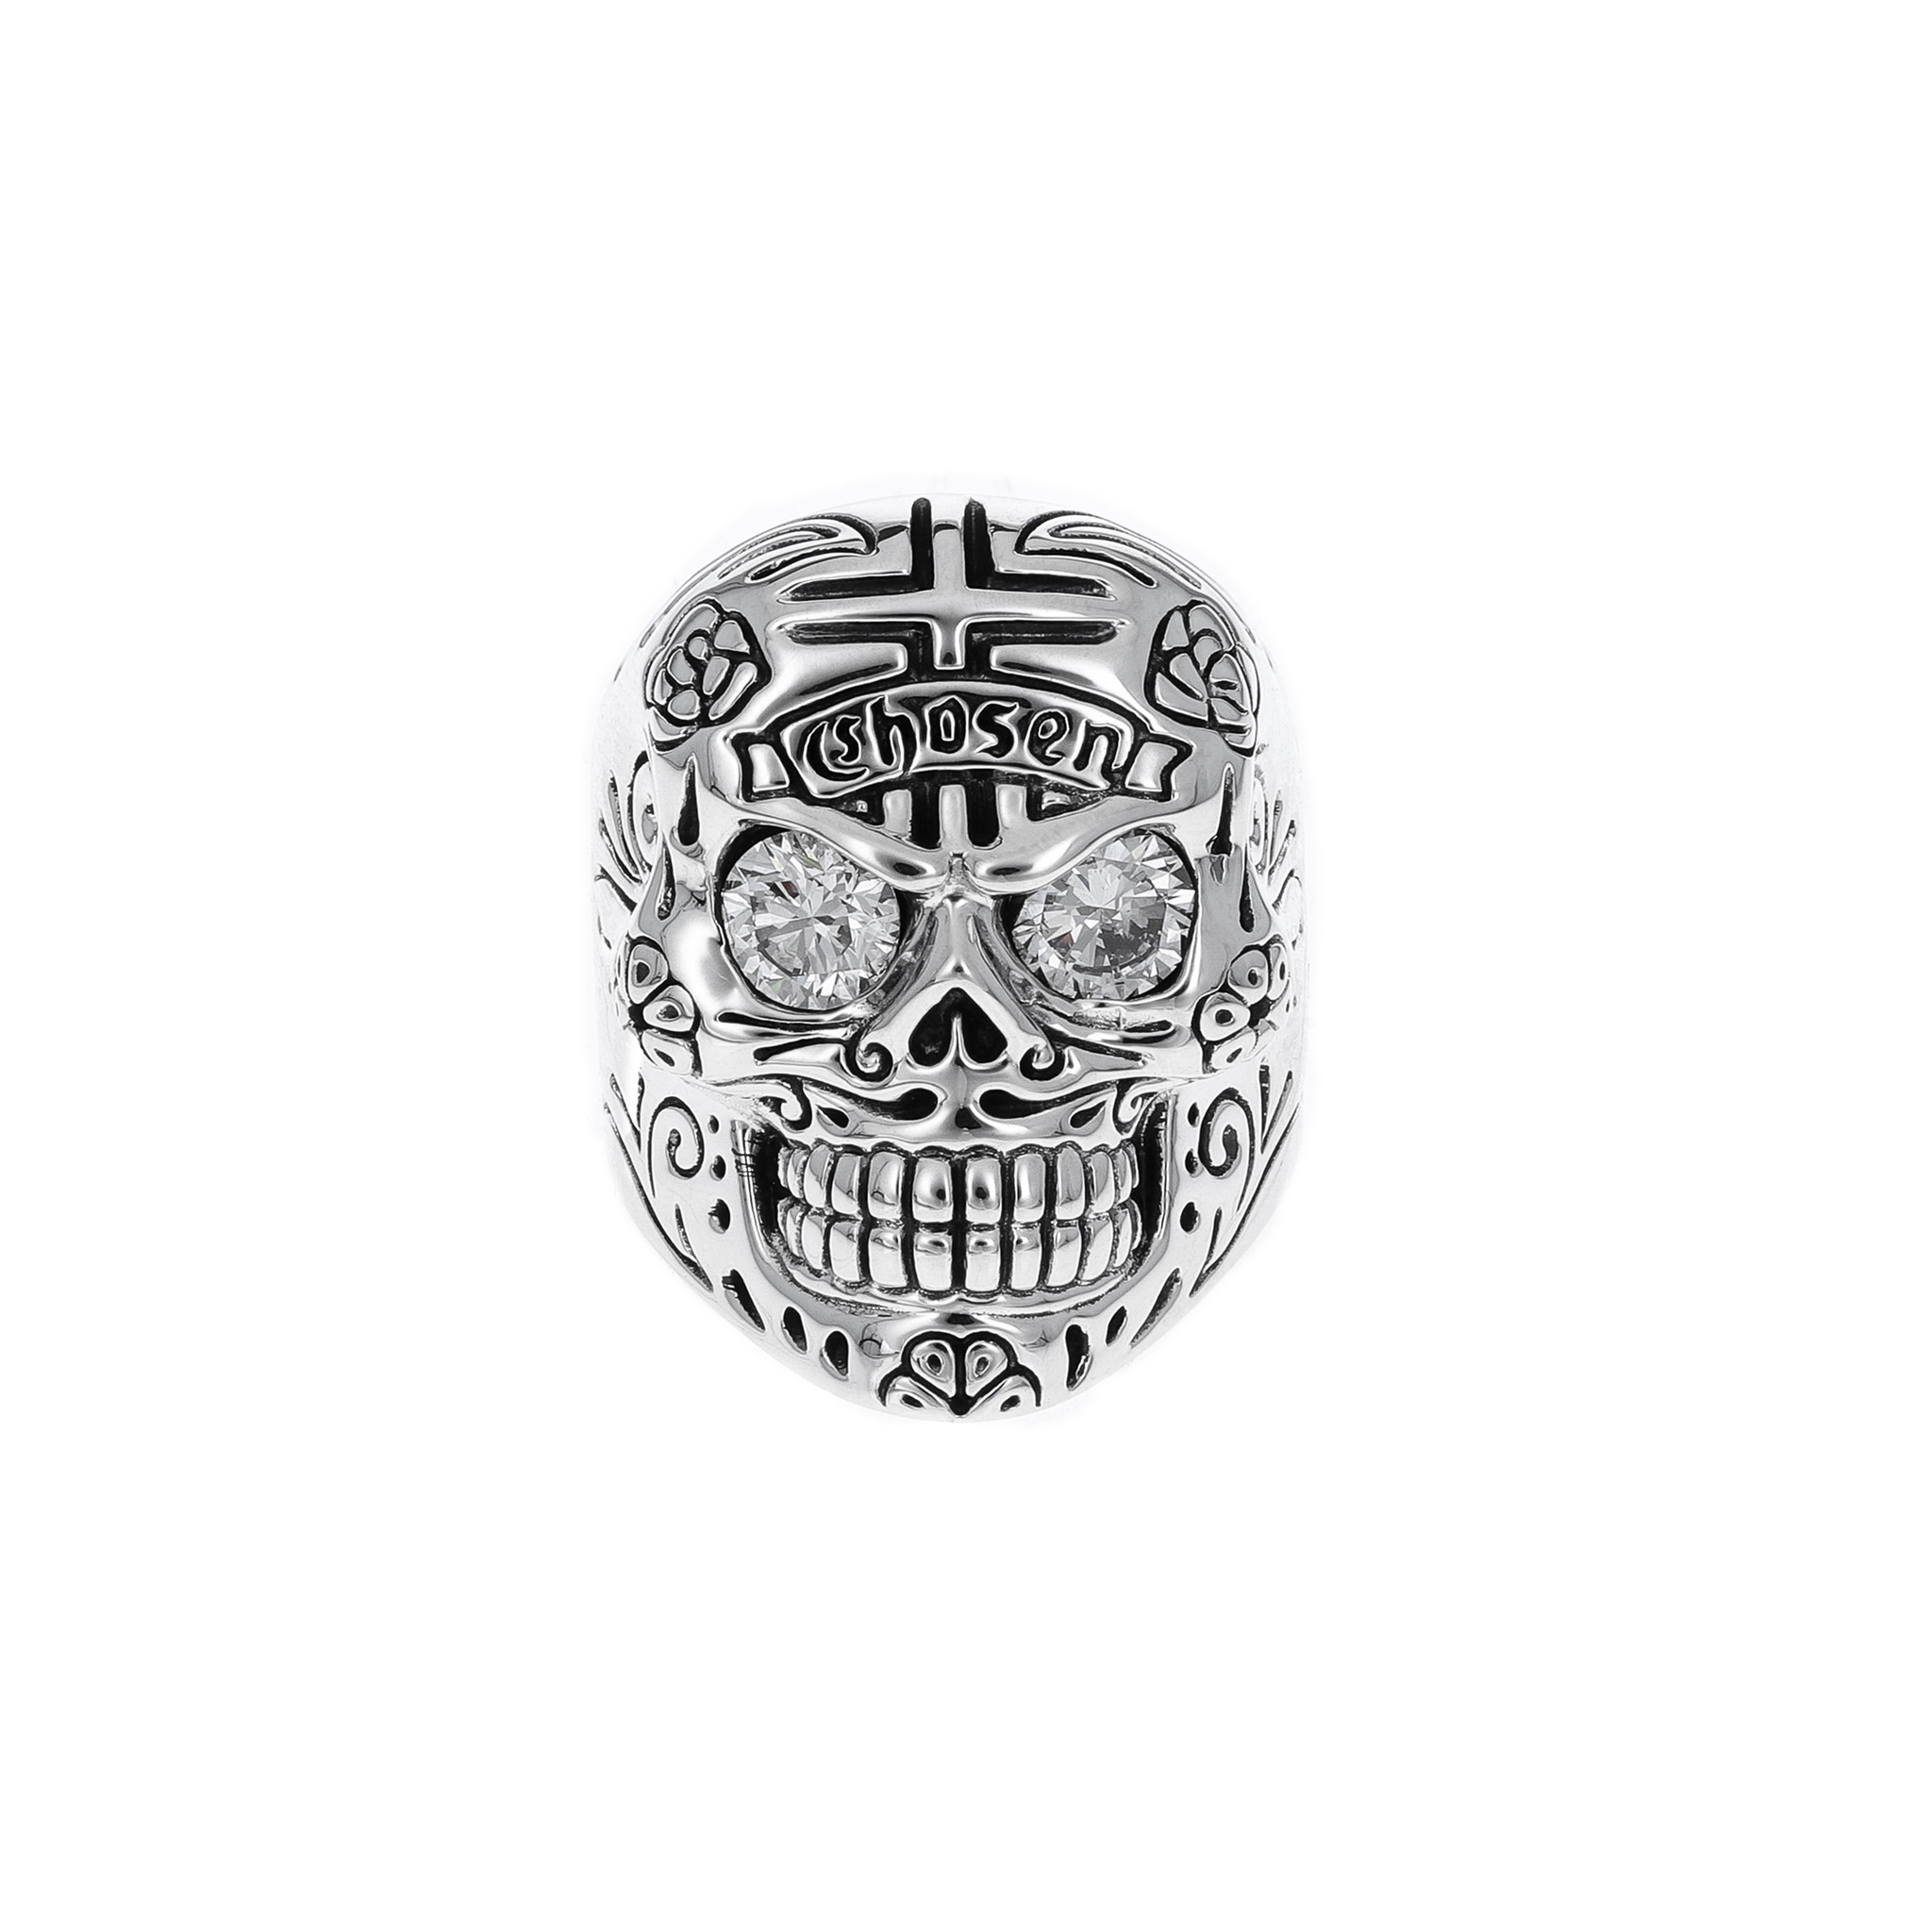 Product shot of Skull Ring with Chosen Cross Detail Diamond Eyes front facing view